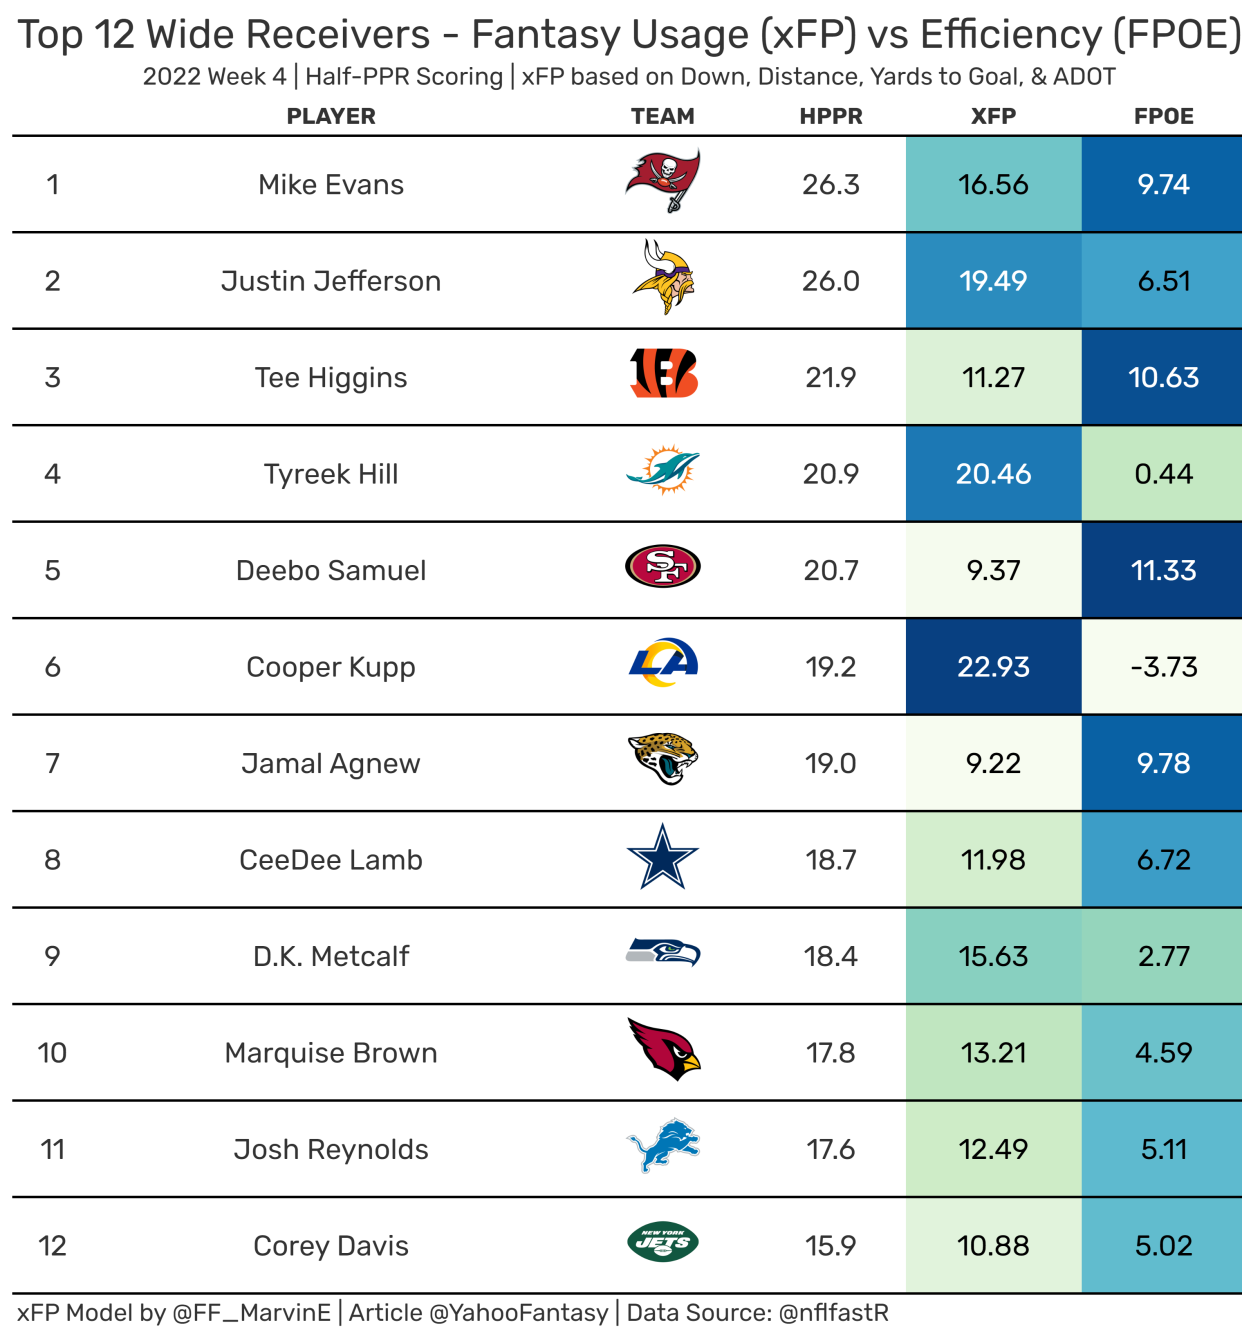 Top-12 Fantasy Wide Receivers from Week 4. (Data used provided by nflfastR)